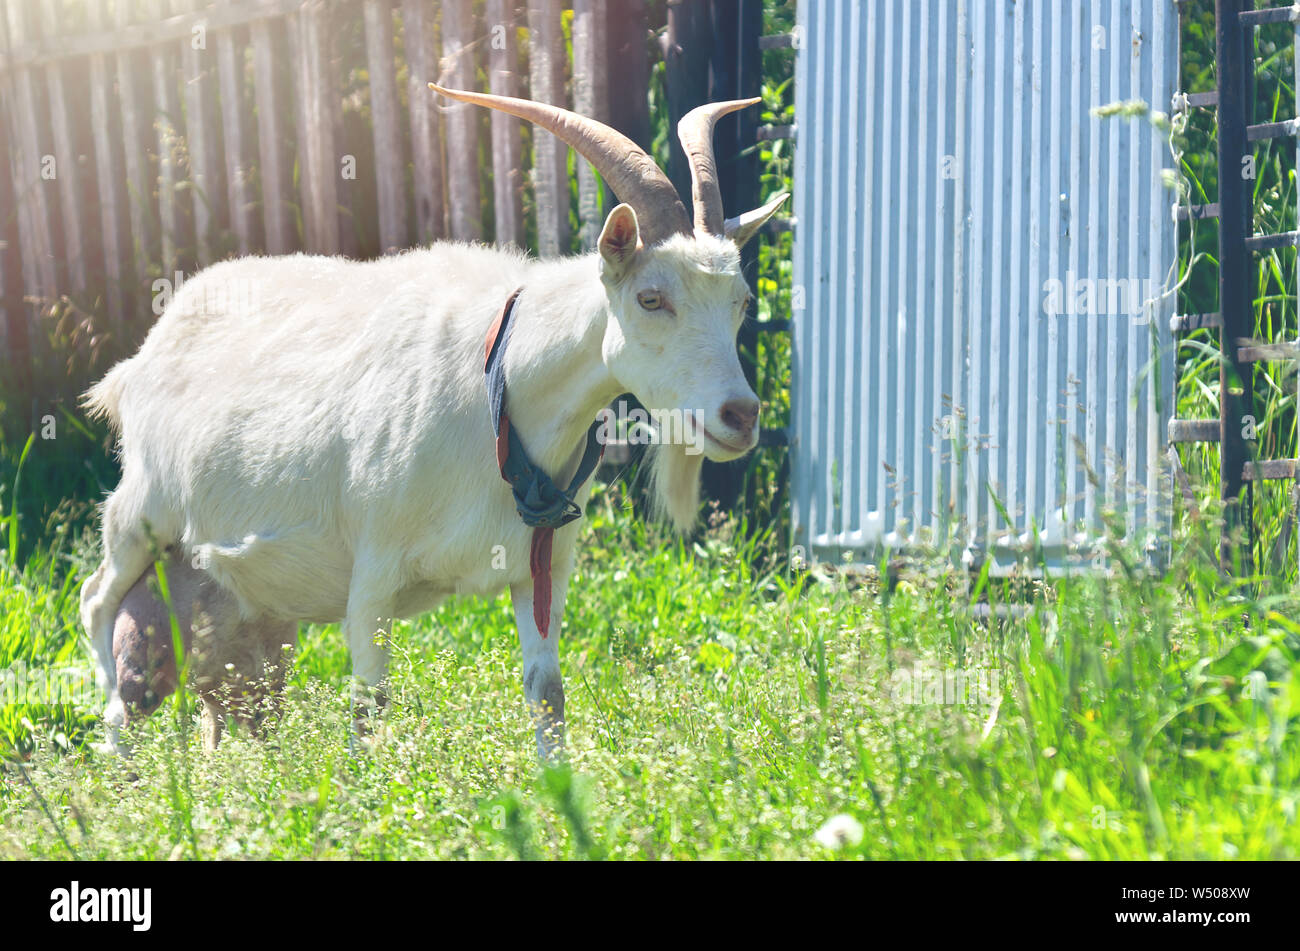 The Domestic White Nanny Goat or Doe (Capra Aegagrus Hircus) With Handmade Collar Walking Along the Fence in a Rural Area on a Sunny Summer Day. Stock Photo